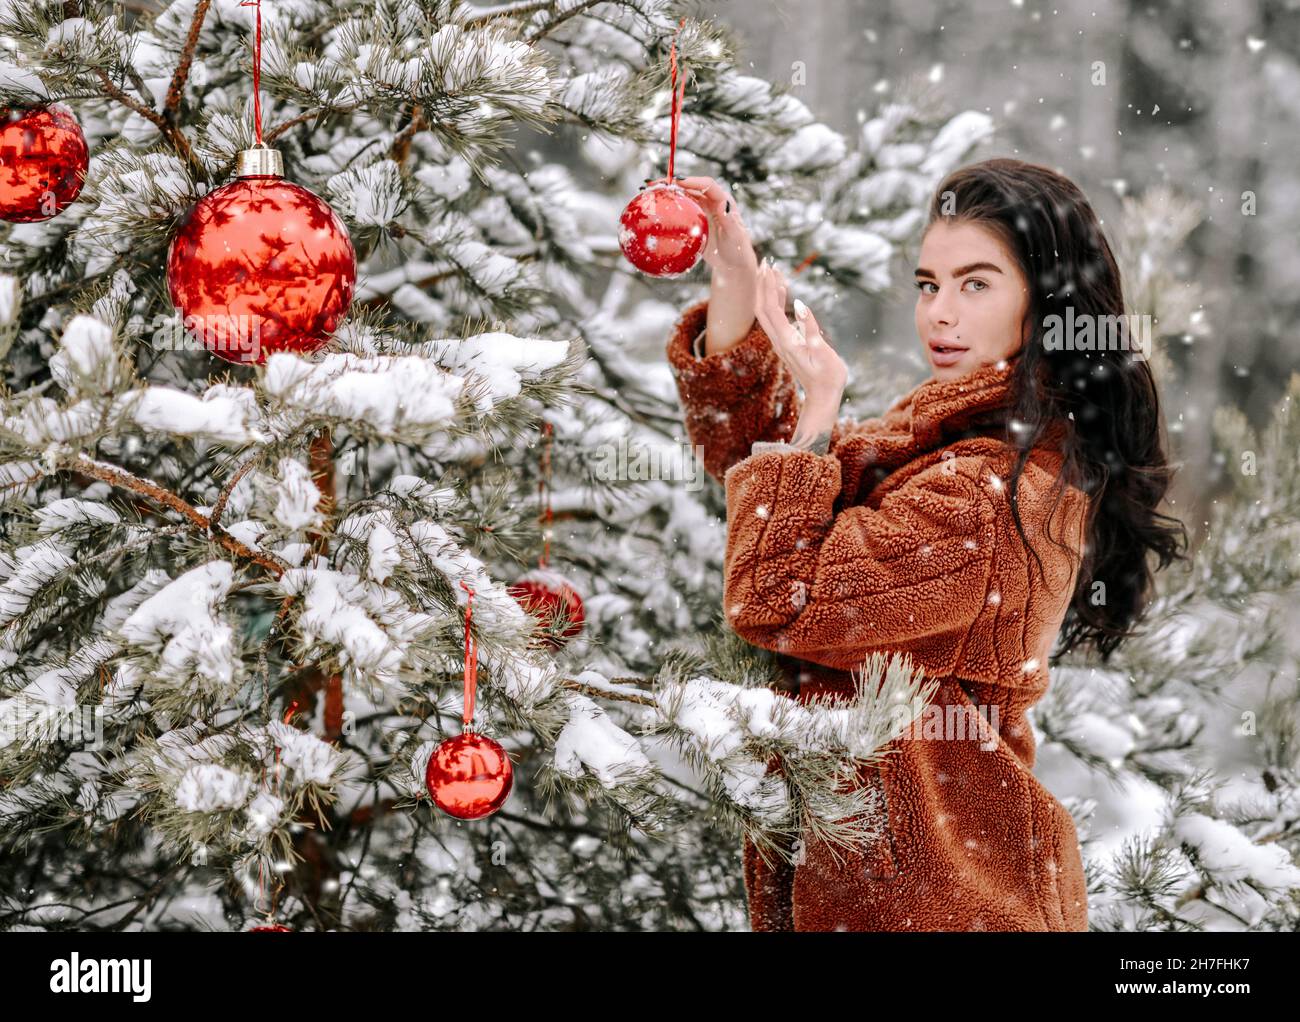 Young sexy woman in stylish fur coat stands near decorates Christmas tree with red balls under snow Stock Photo